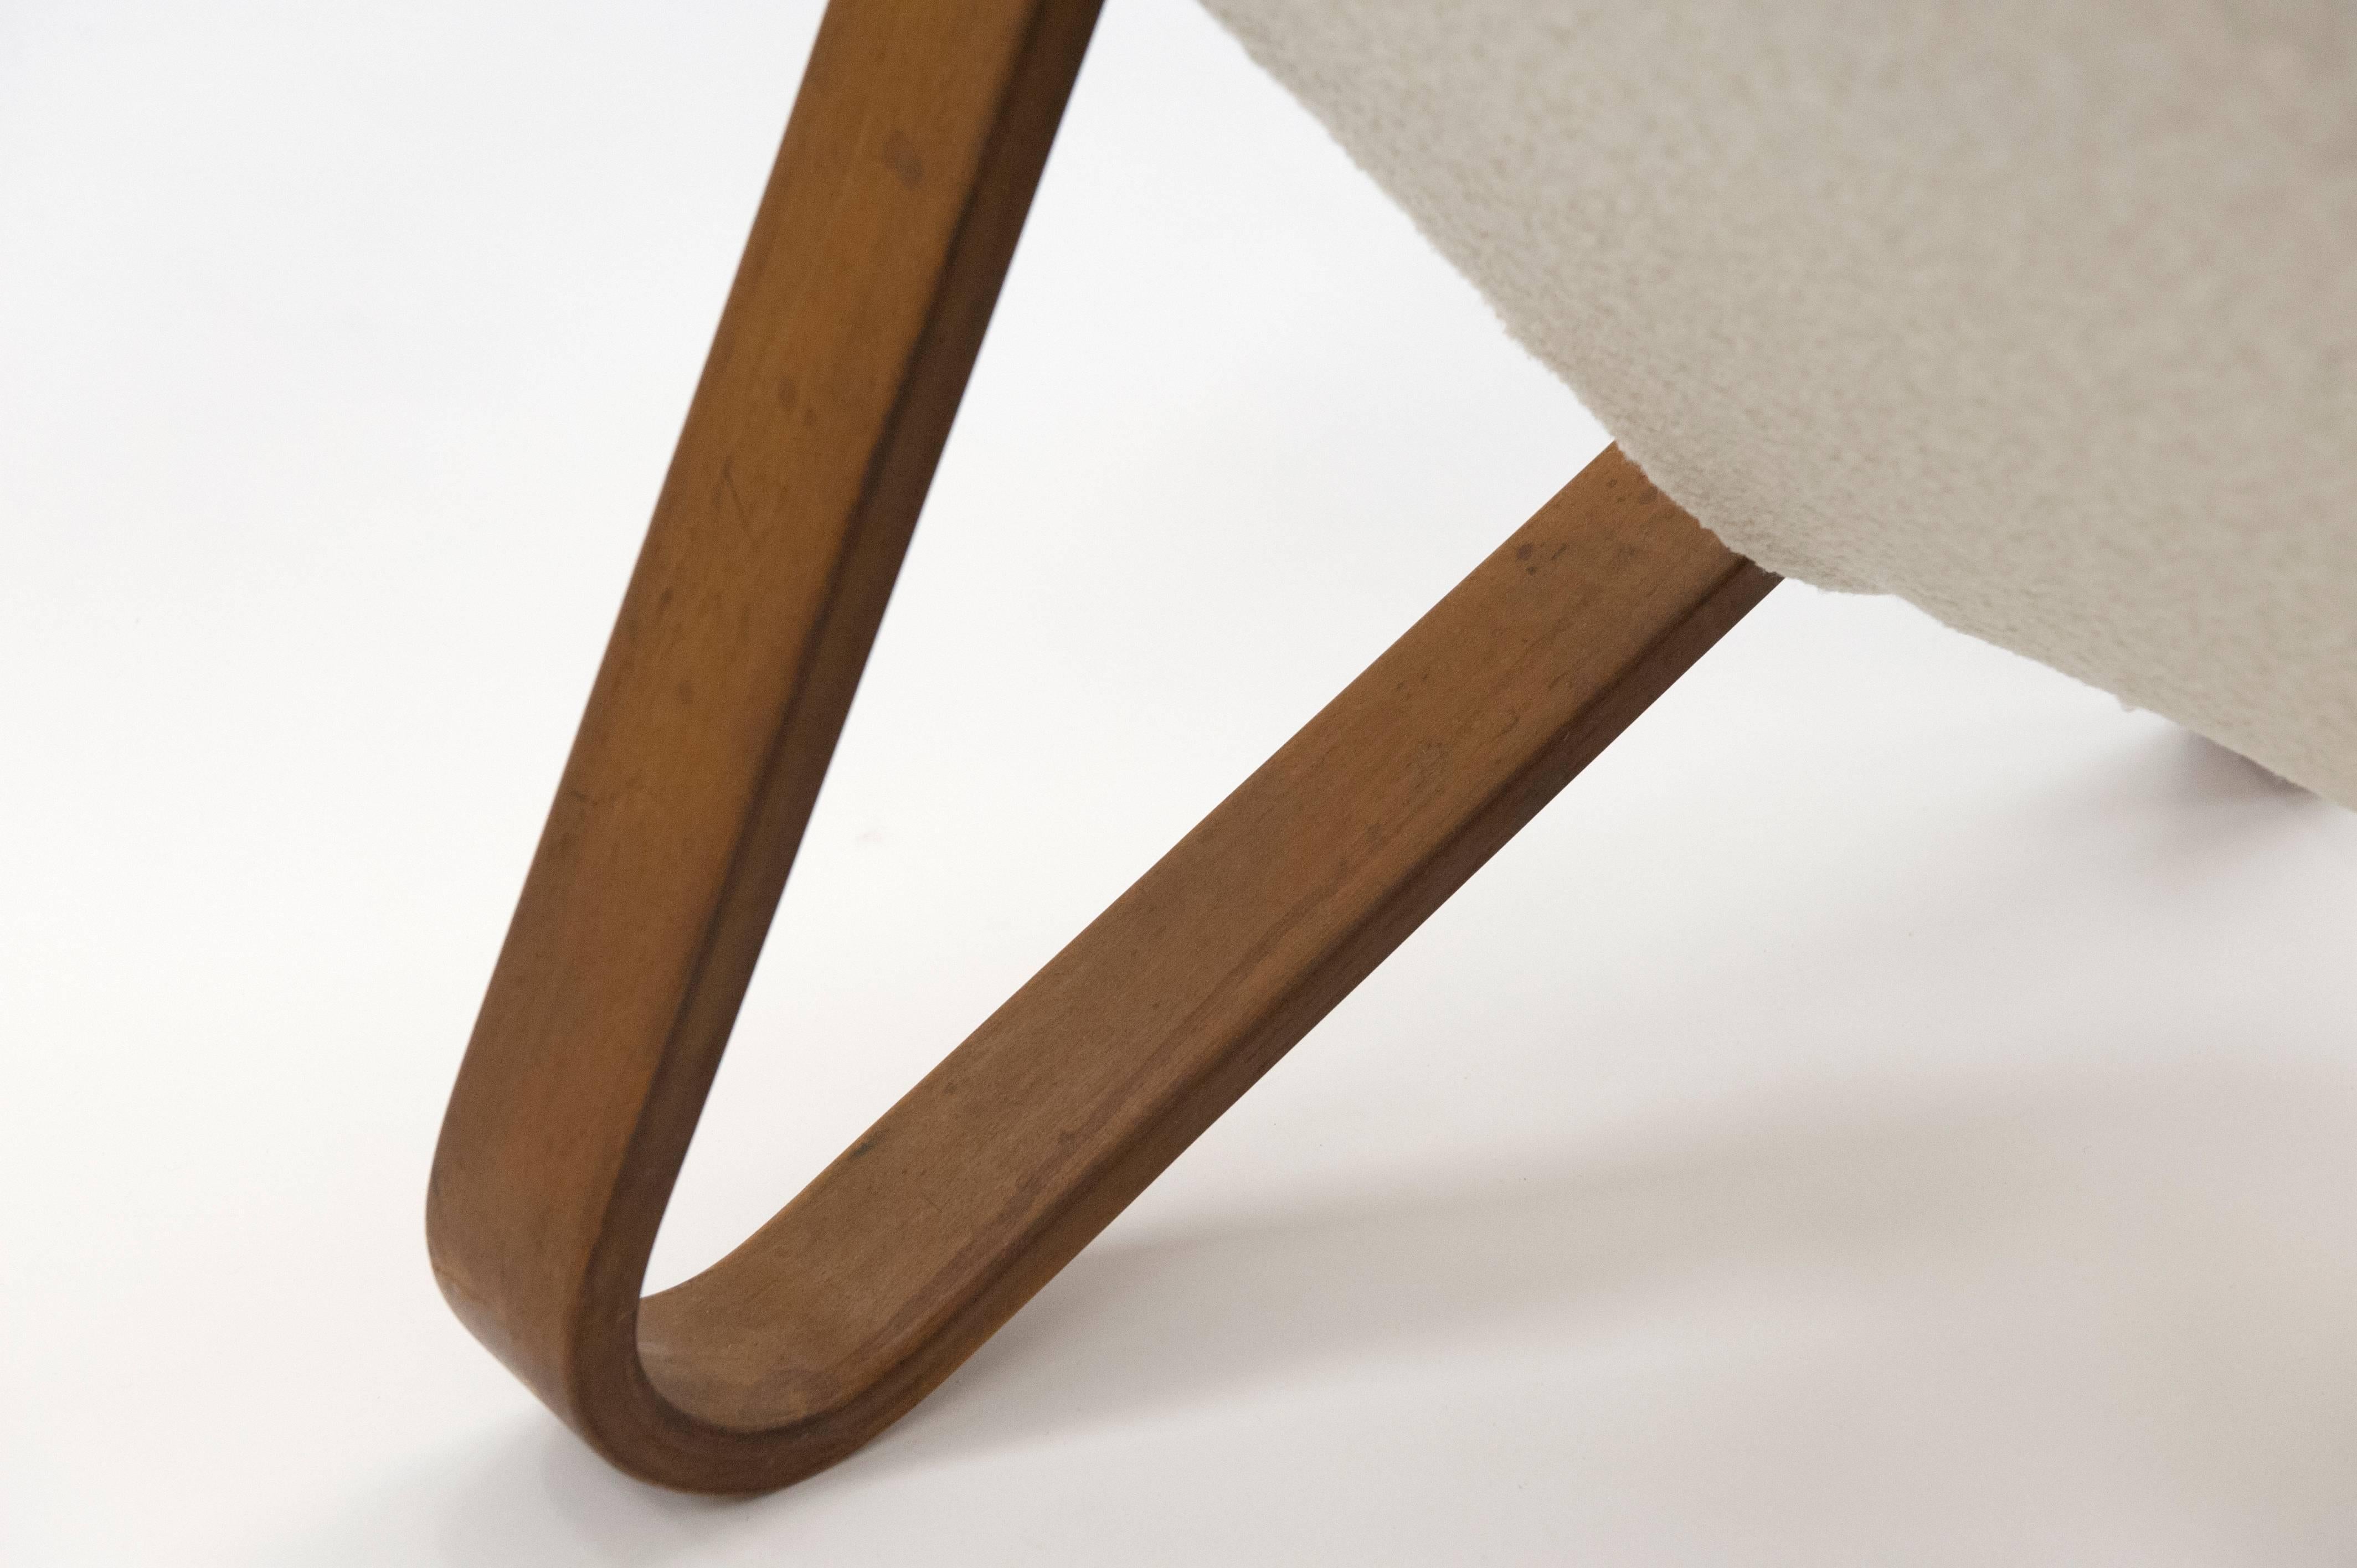 Upholstery Early Eero Saarinen Grasshopper Chair for Knoll